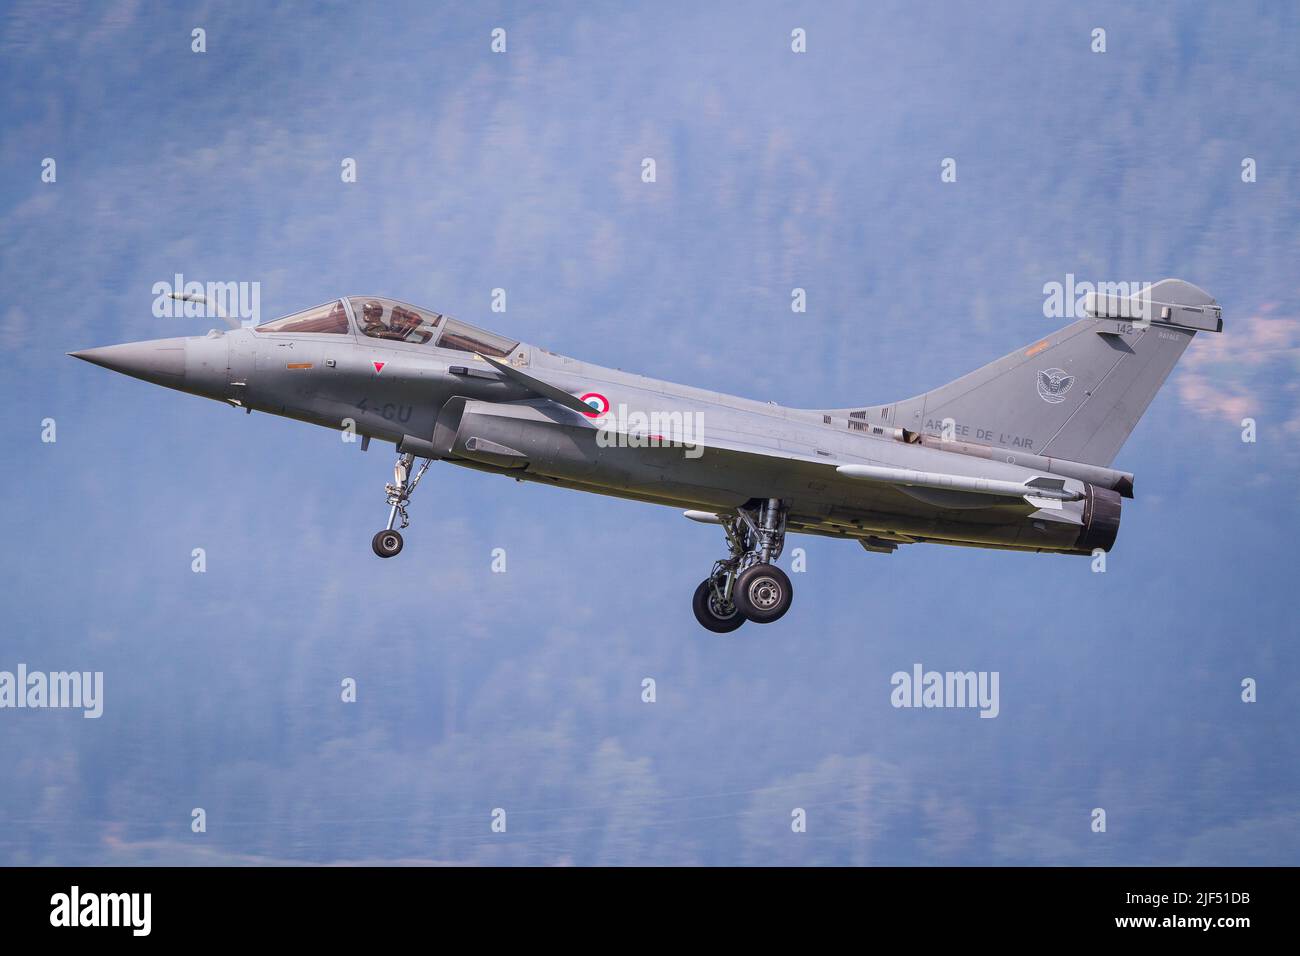 A french Air Force Dassaul Rafale fighter jet landing with gear down Stock Photo